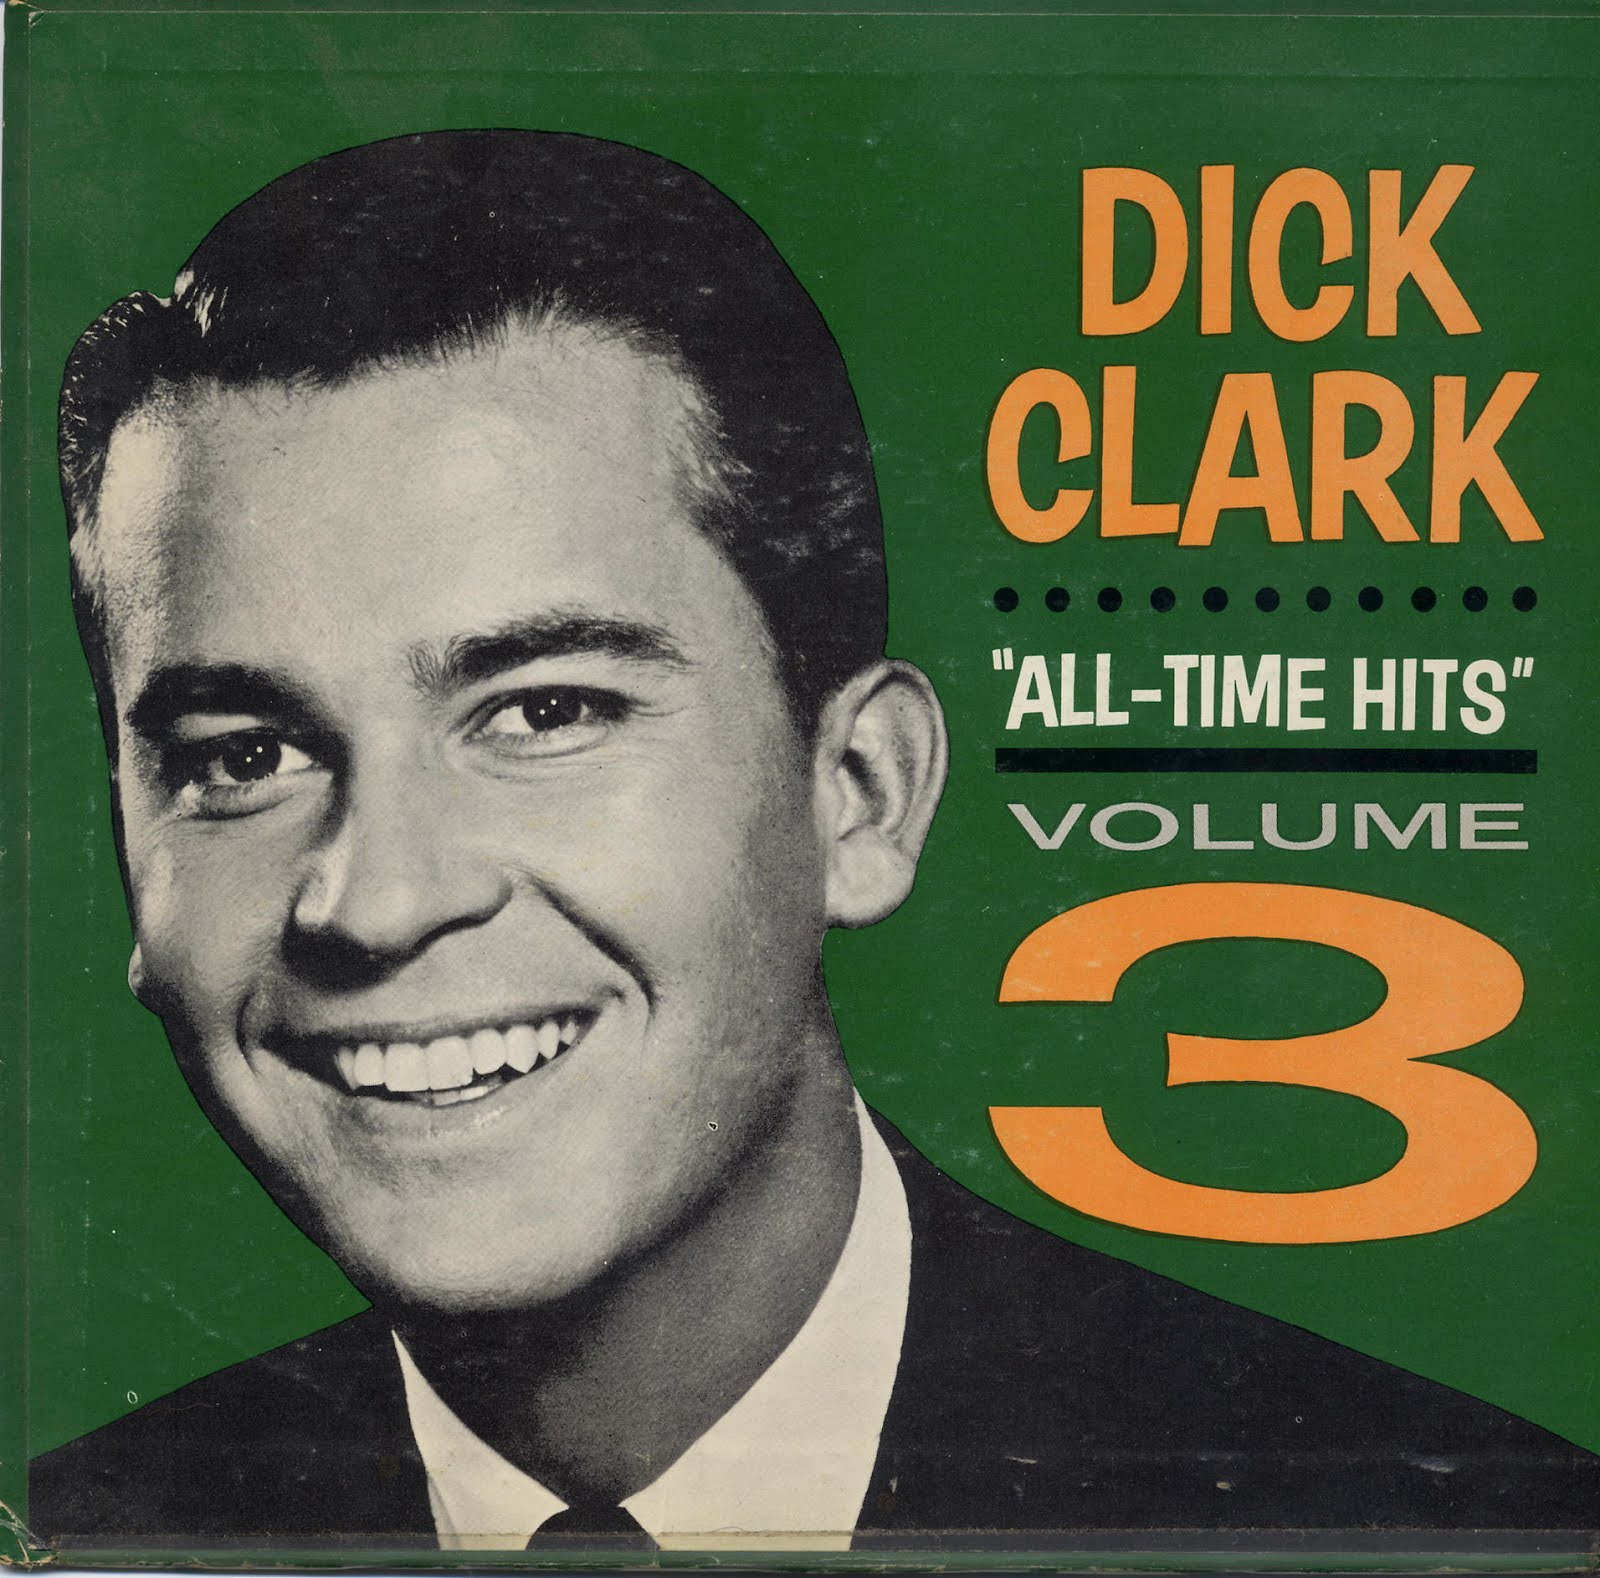 Dick clark's all time hits vol 3